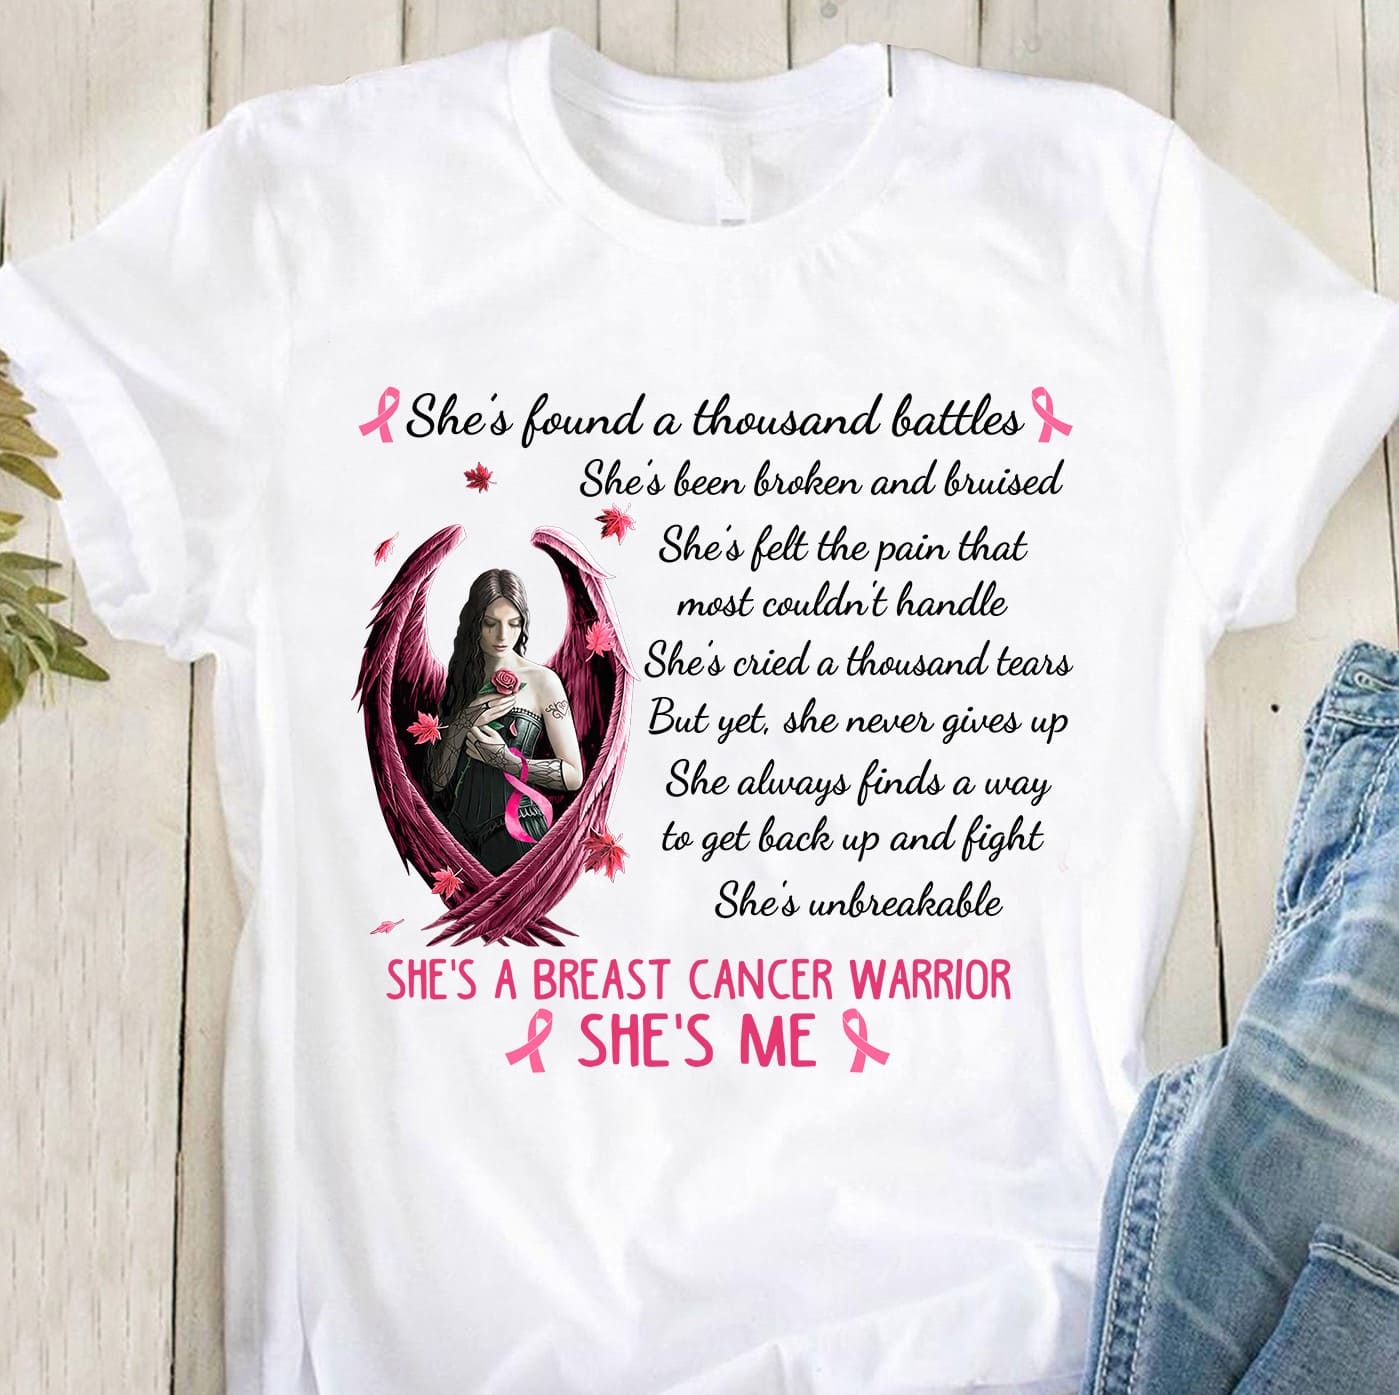 She's a Breast cancer warrior - Breast cancer awareness T-shirt, beautiful and strong woman